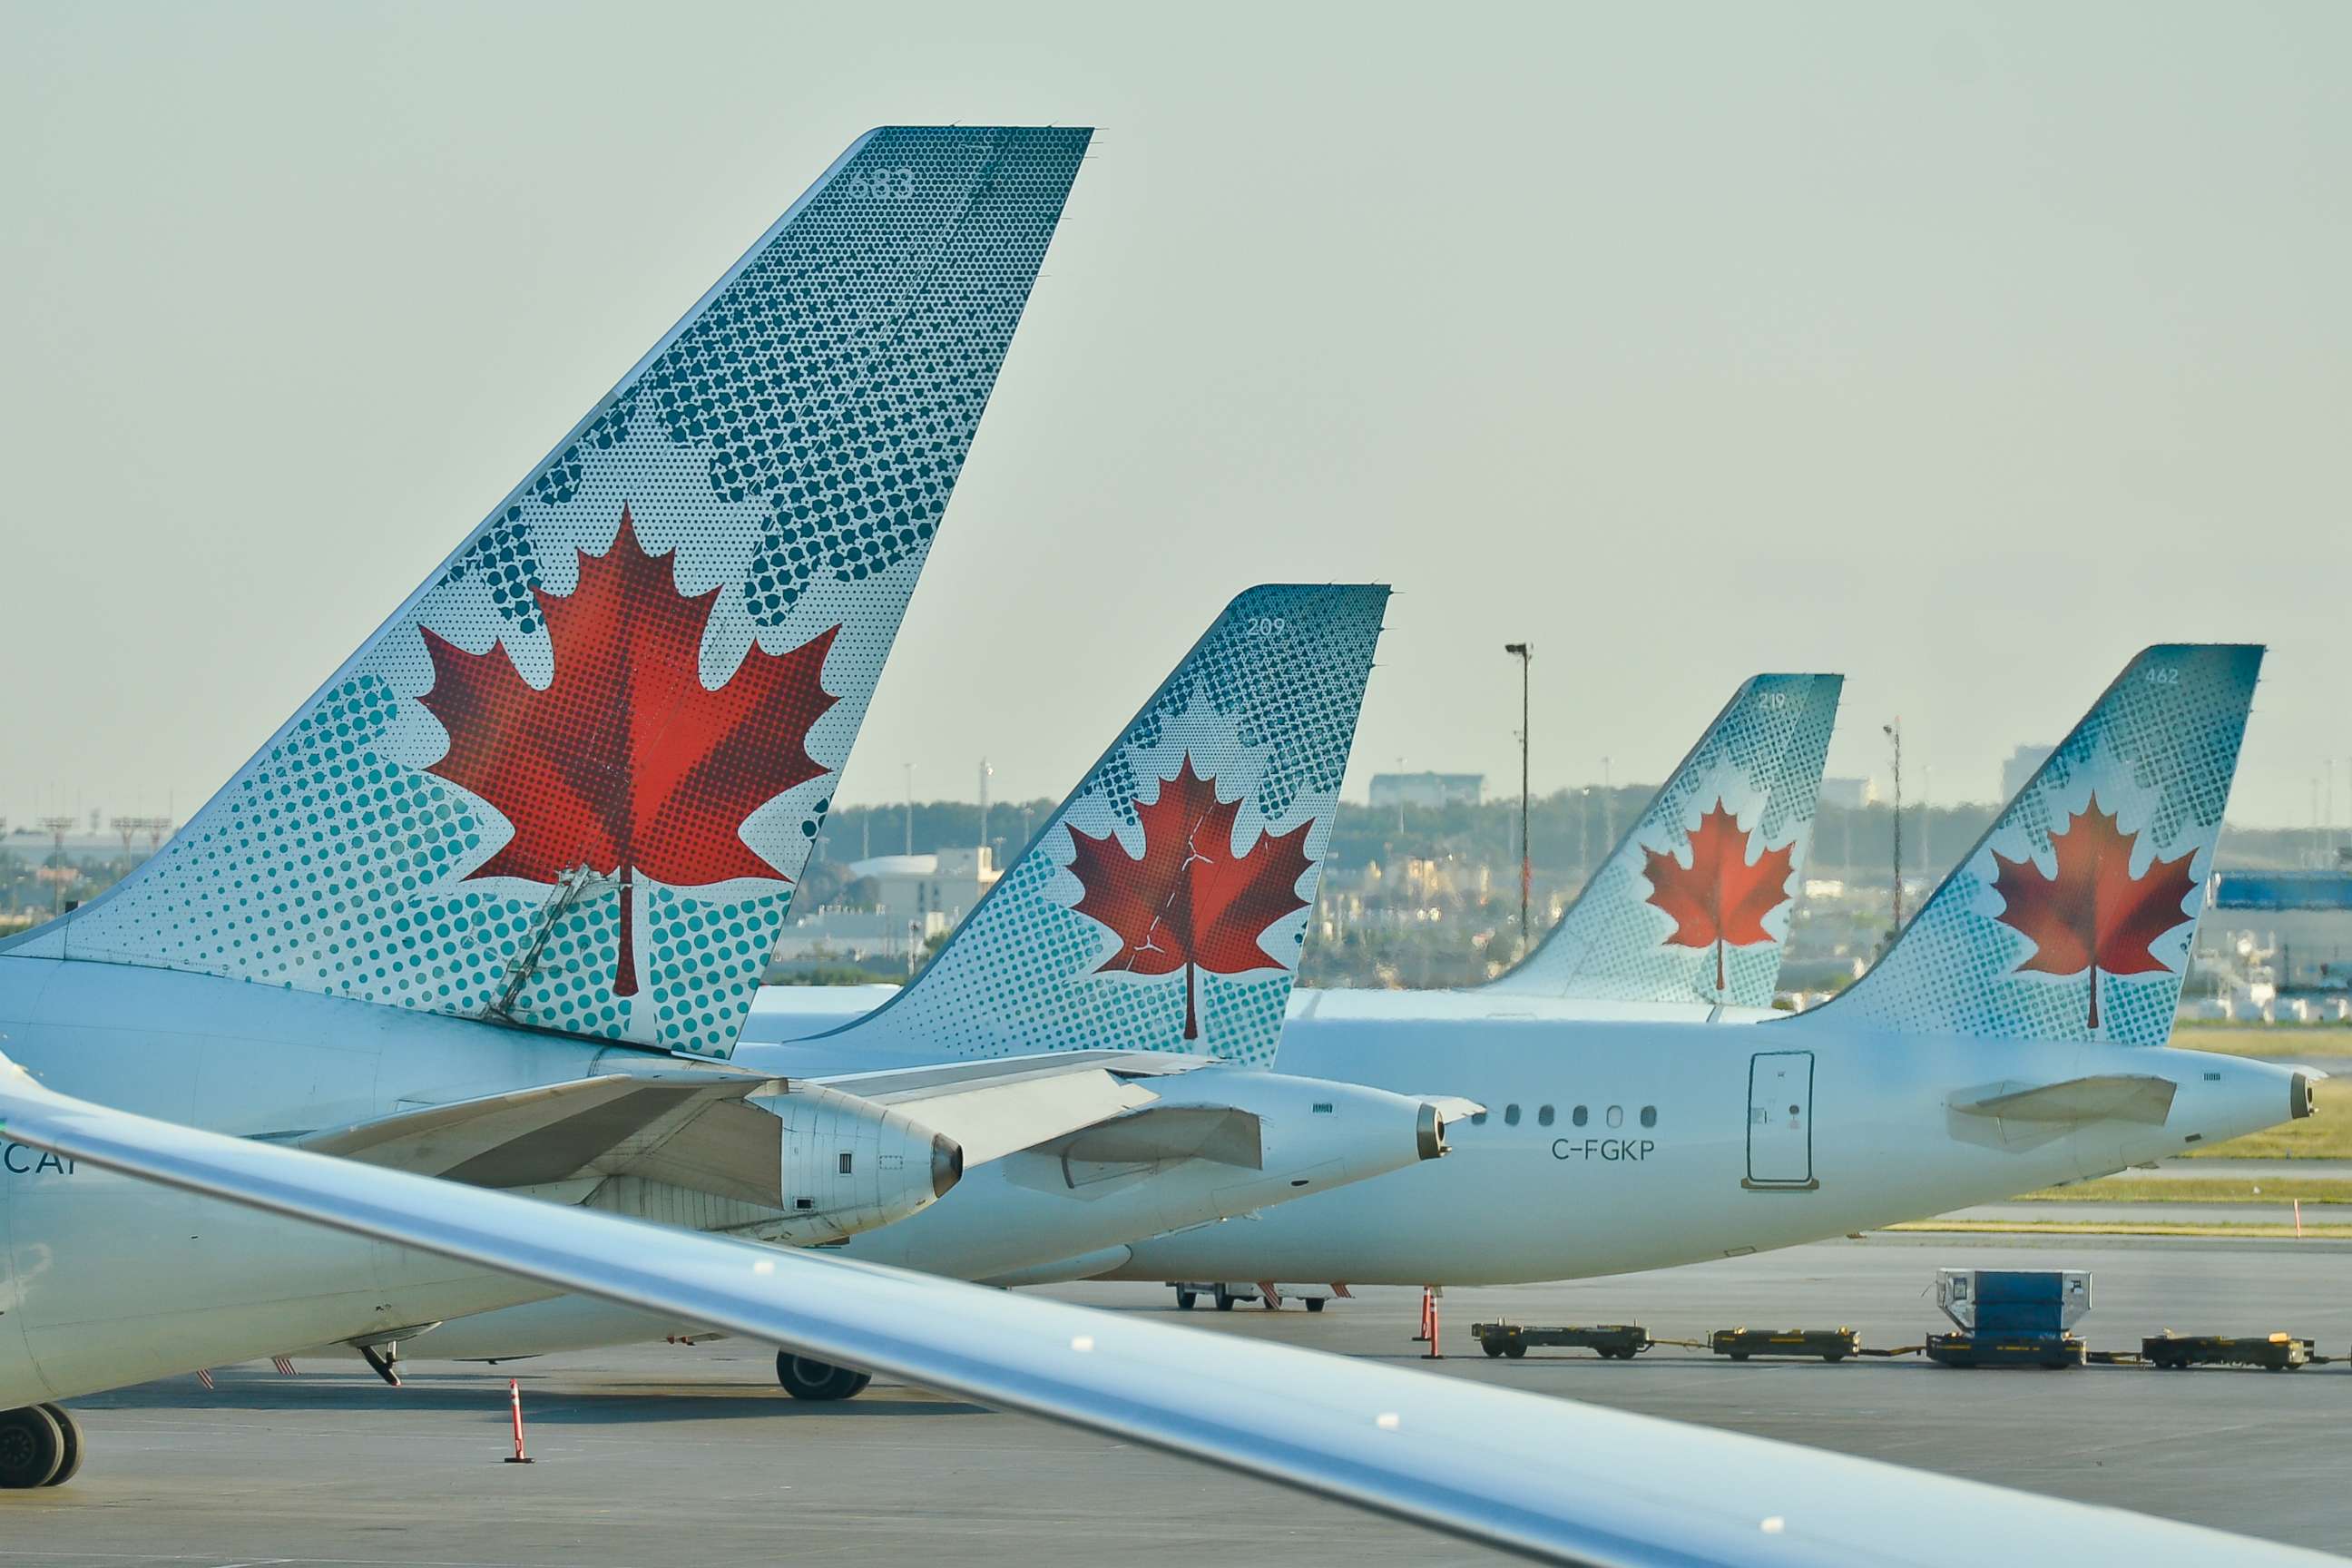 PHOTO: A view of Air Canada planes at Toronto Pearson International Airport, July 2016.